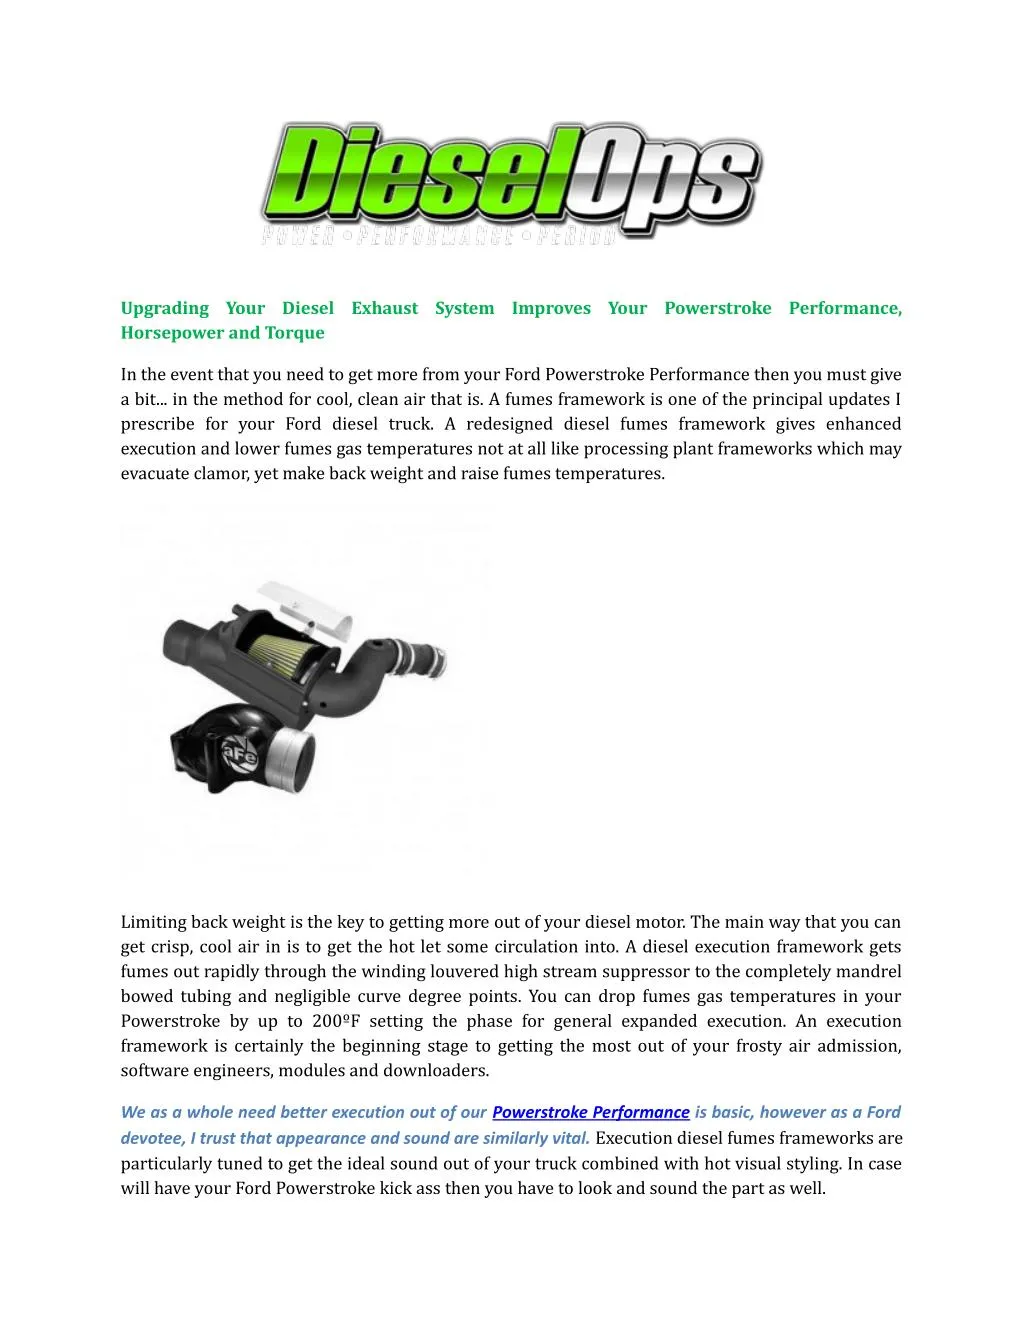 upgrading your diesel exhaust system improves